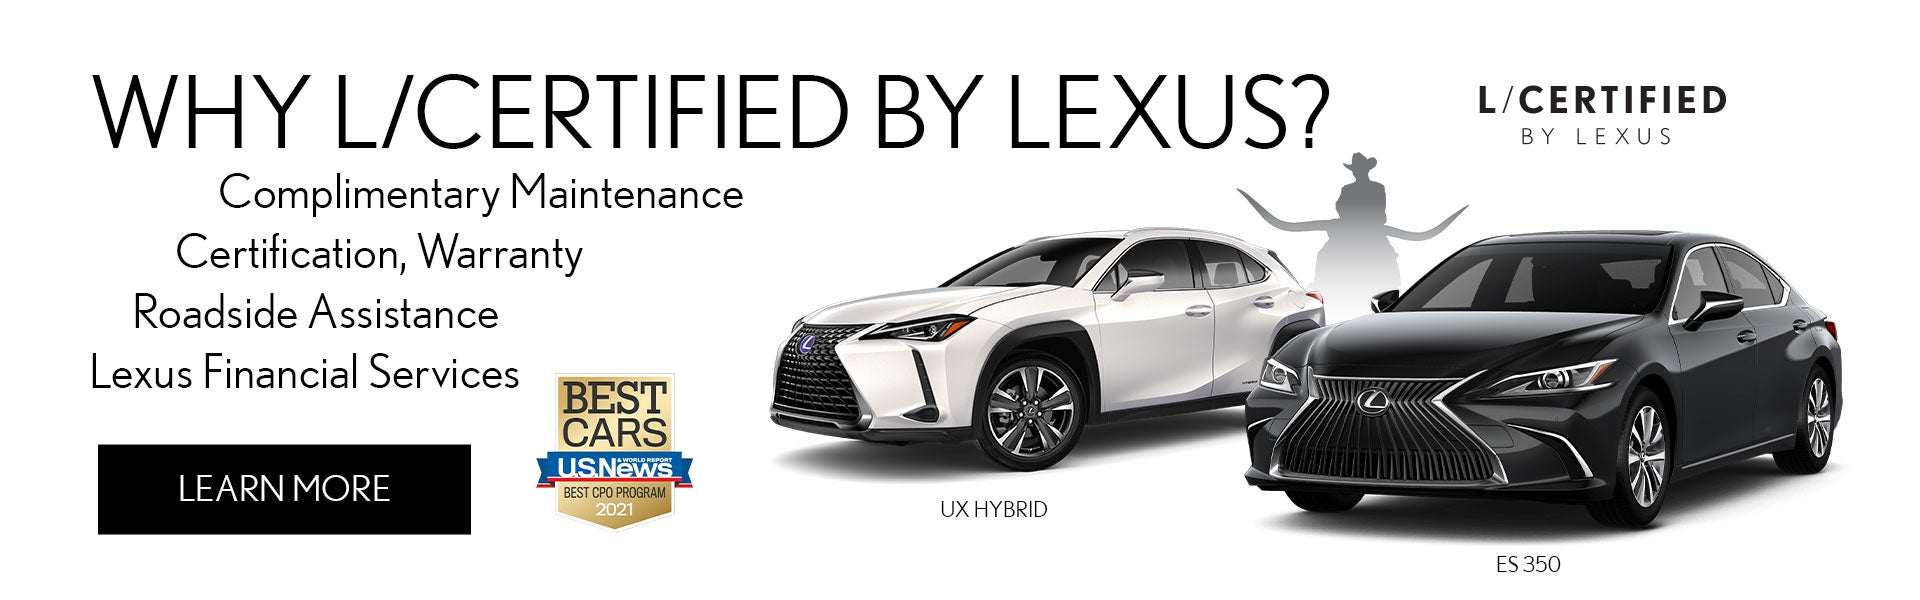 Benefits of buying L/Certified by Lexus